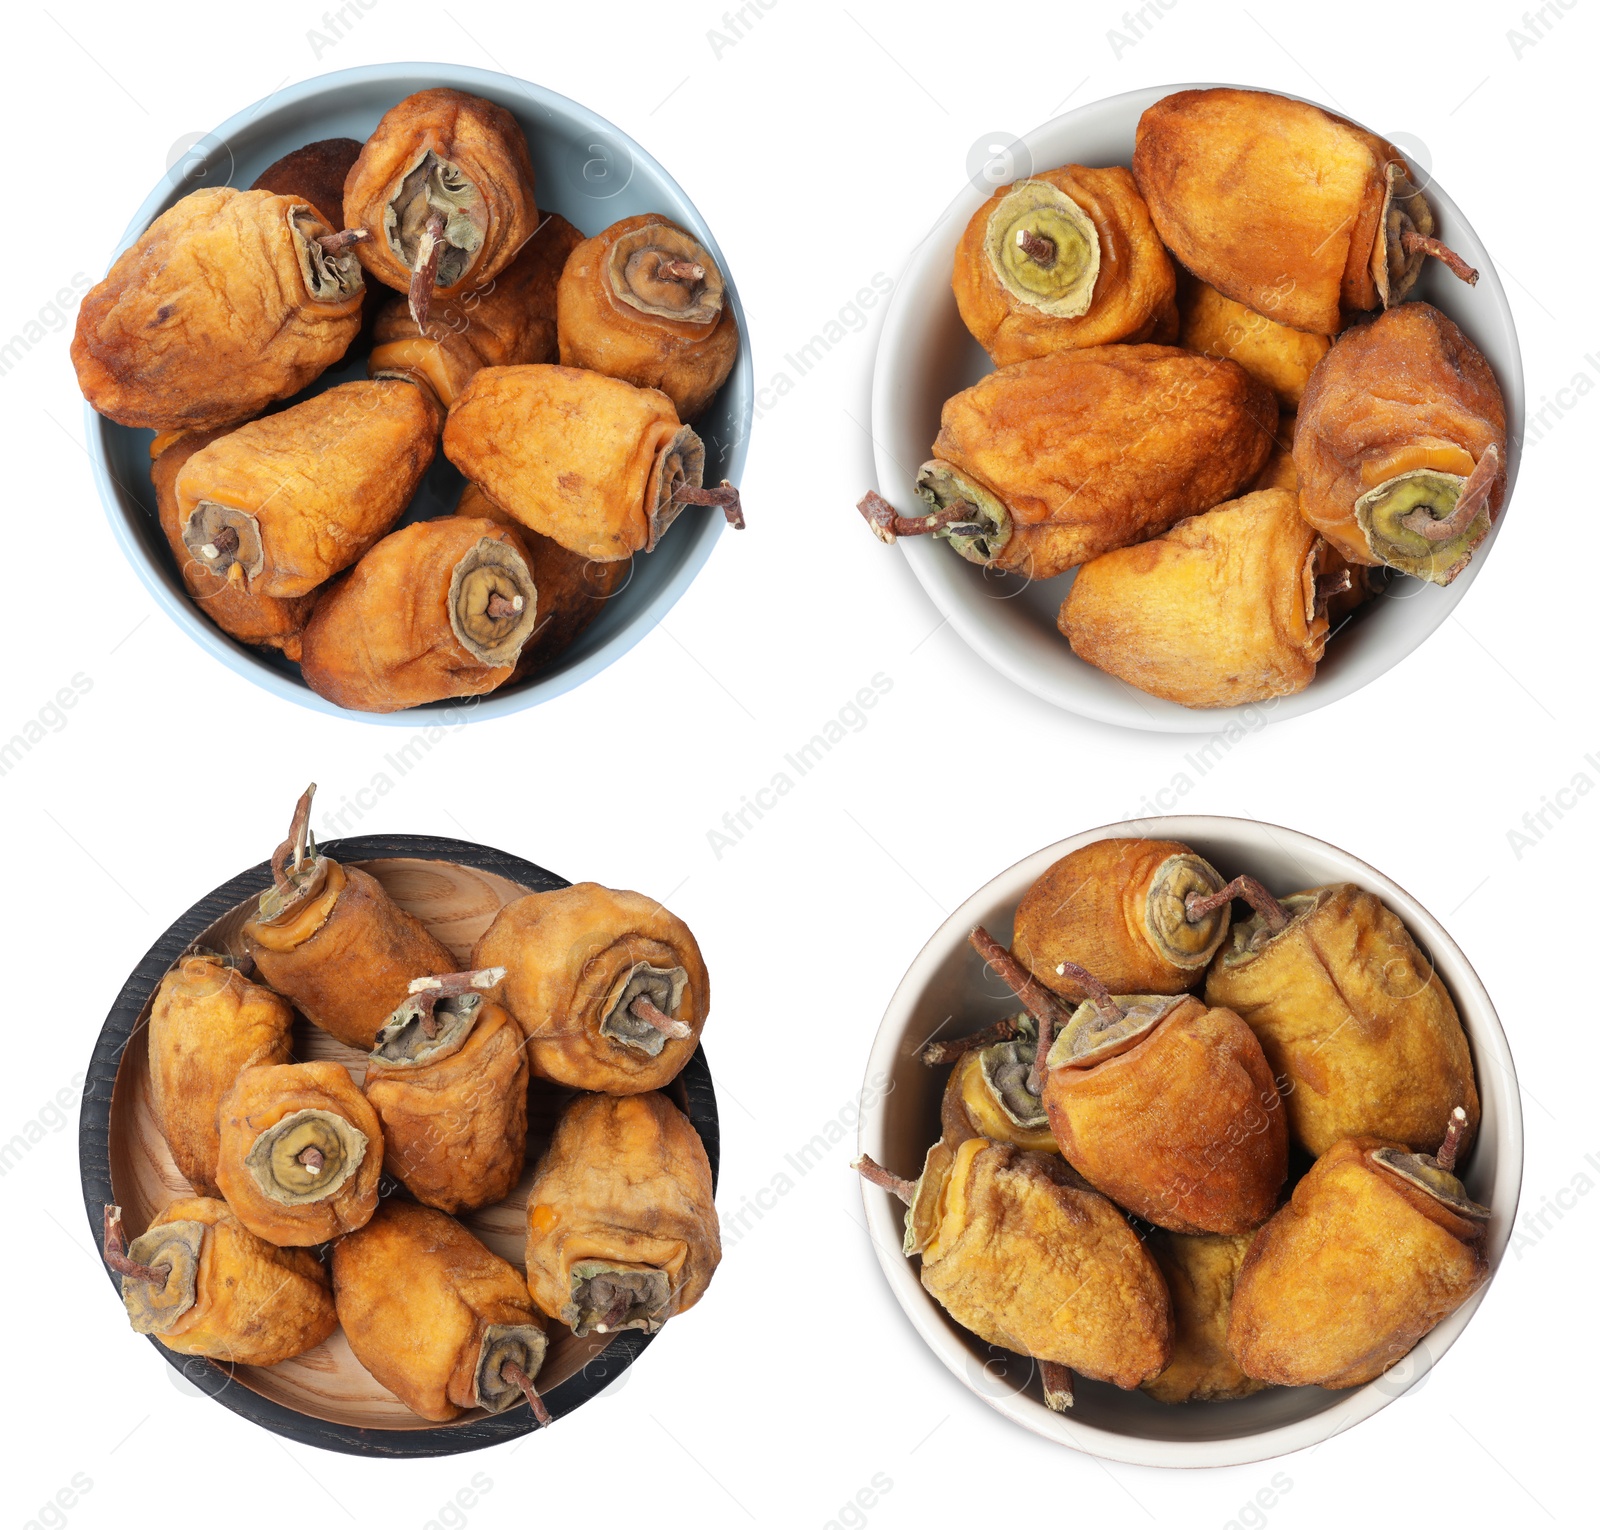 Image of Set with tasty dried persimmon fruits on white background, top view